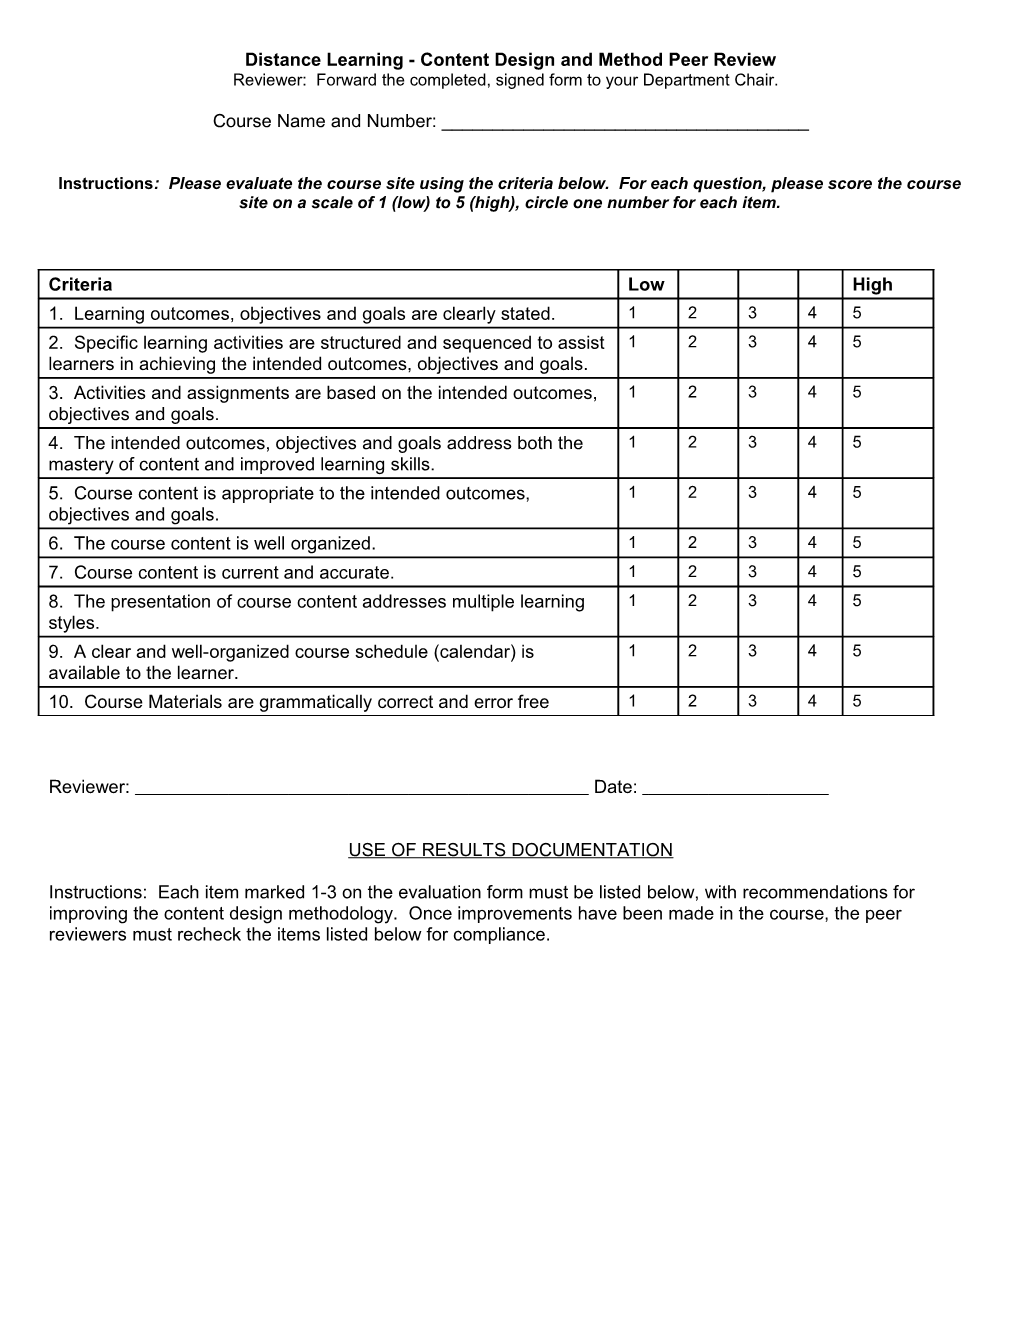 Distance Learning Technical Review Evaluation Sheet